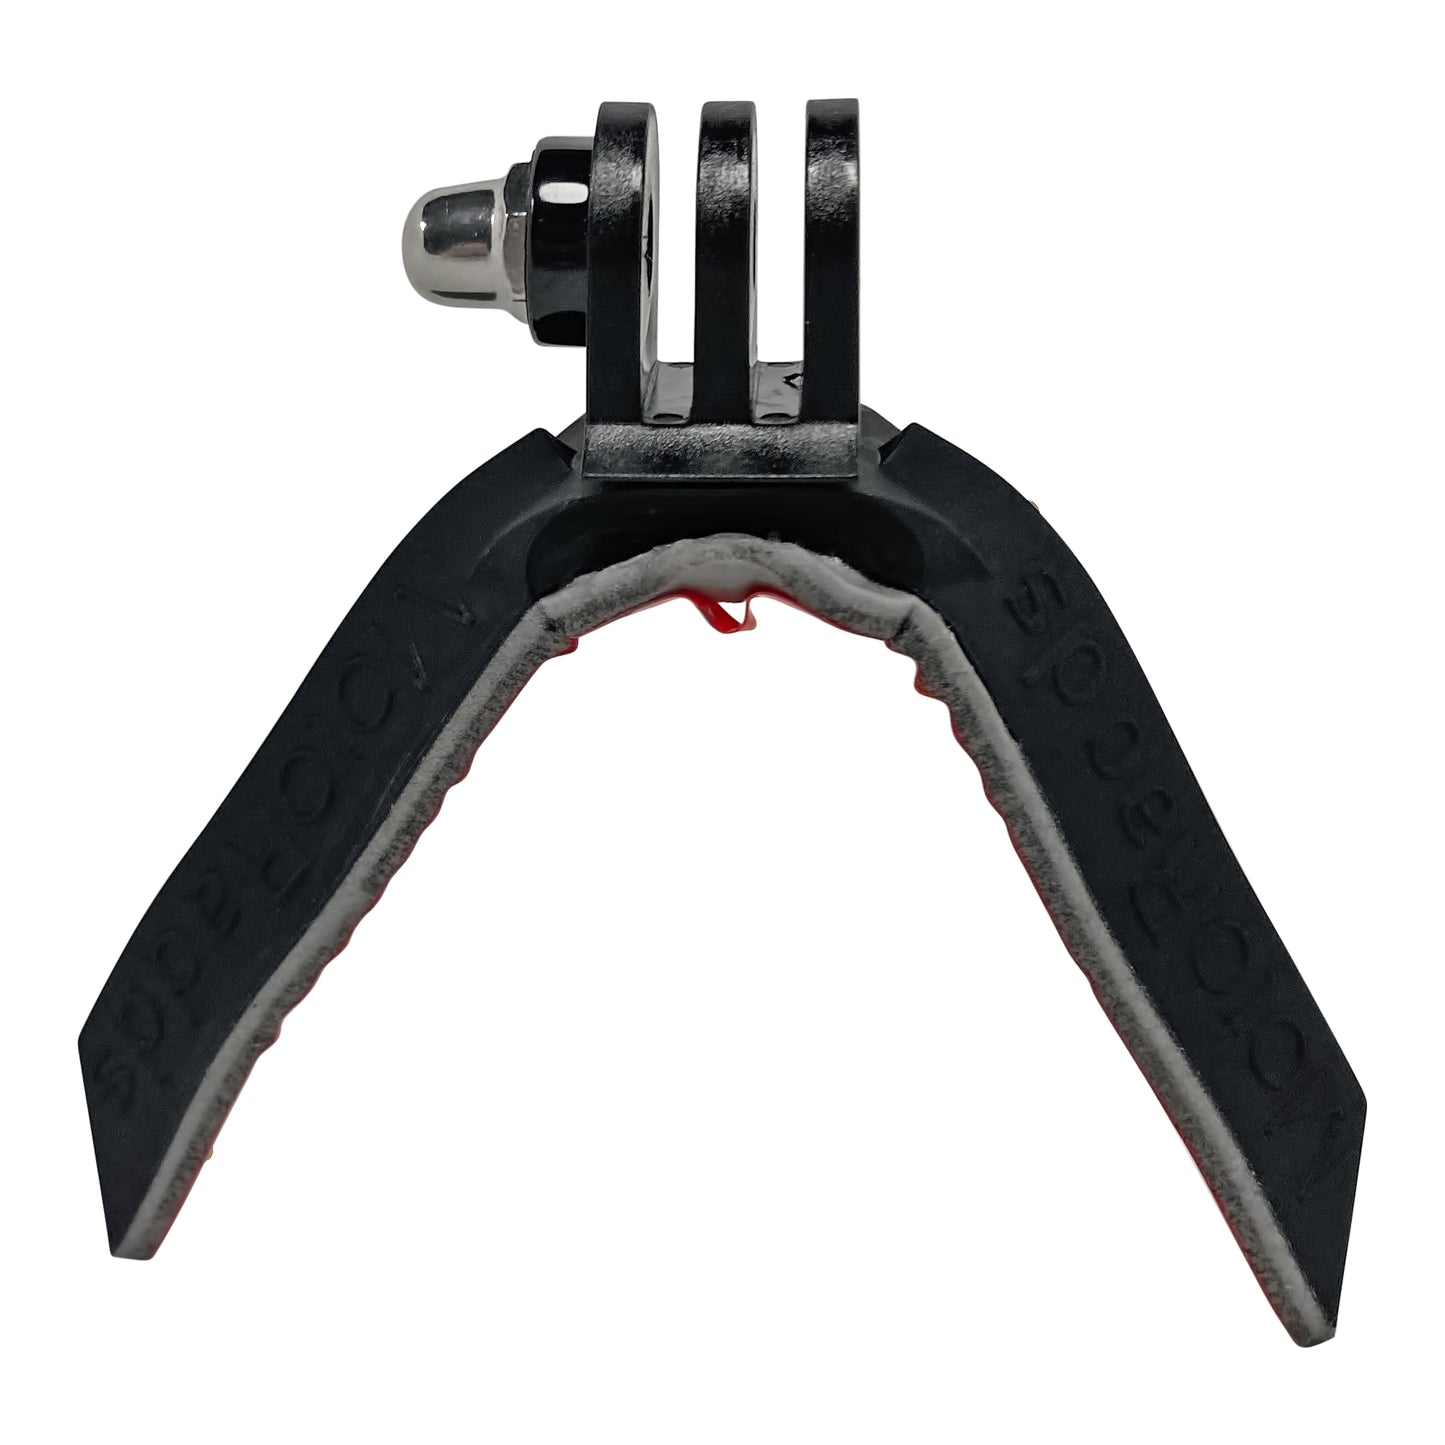 FLEX Chin Mount for AIROH SPARK